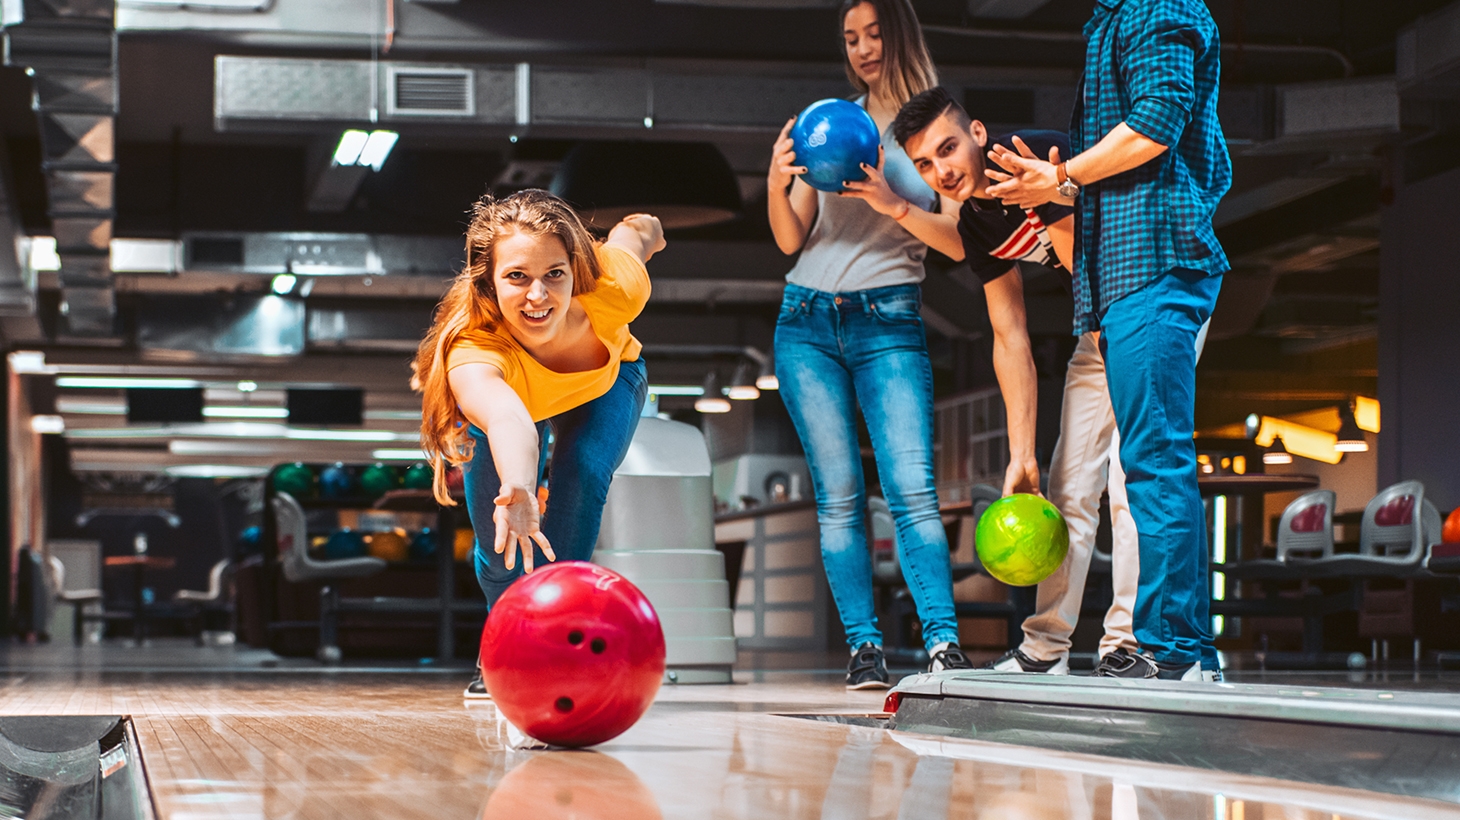 The Best Bowling Alleys for a Couples’ Night Out That Will Make Your Date Night Special